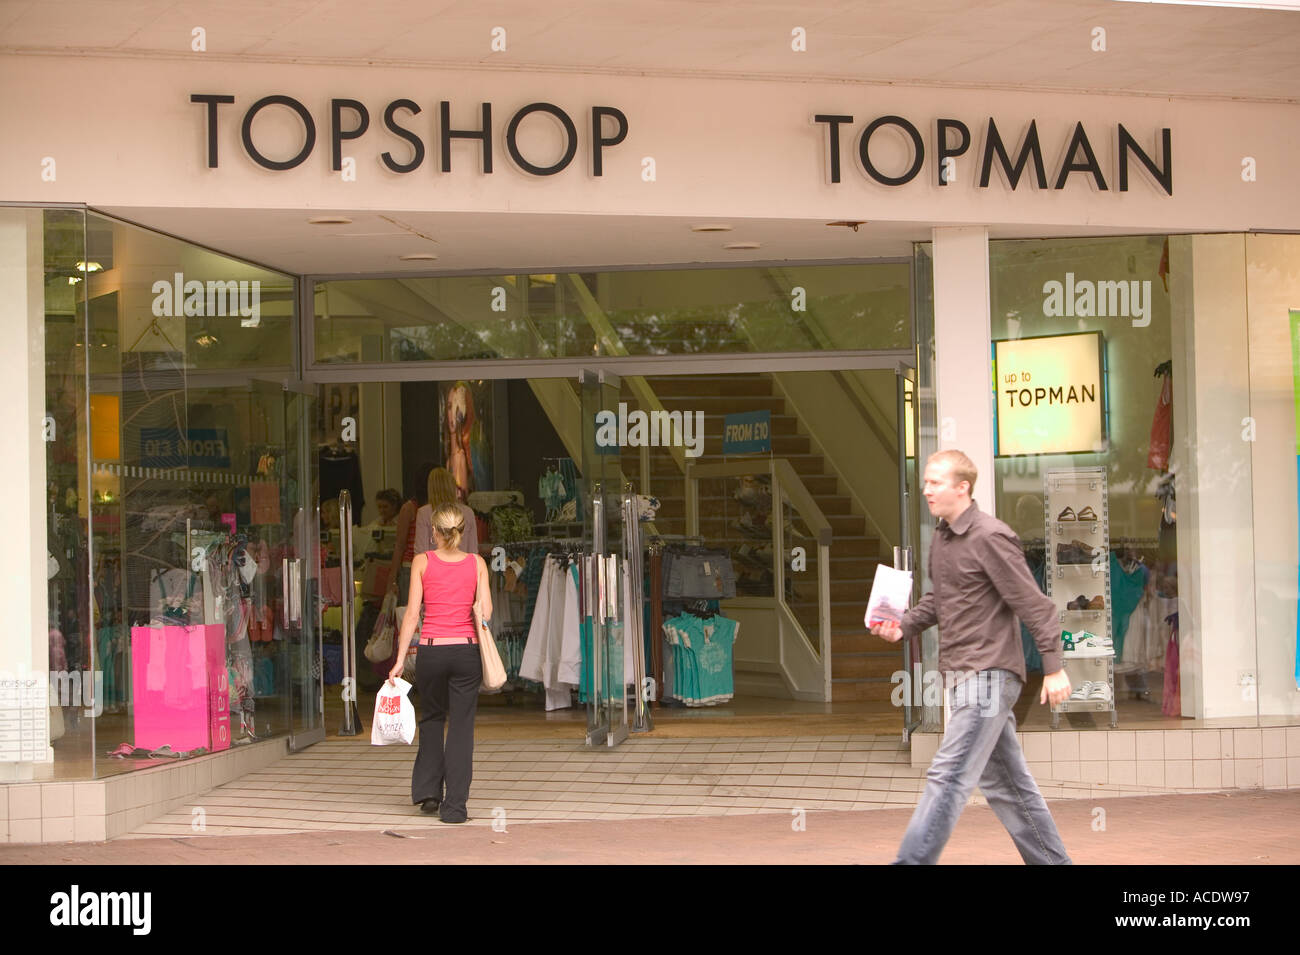 Topshop Topman High Resolution Stock Photography and Images - Alamy